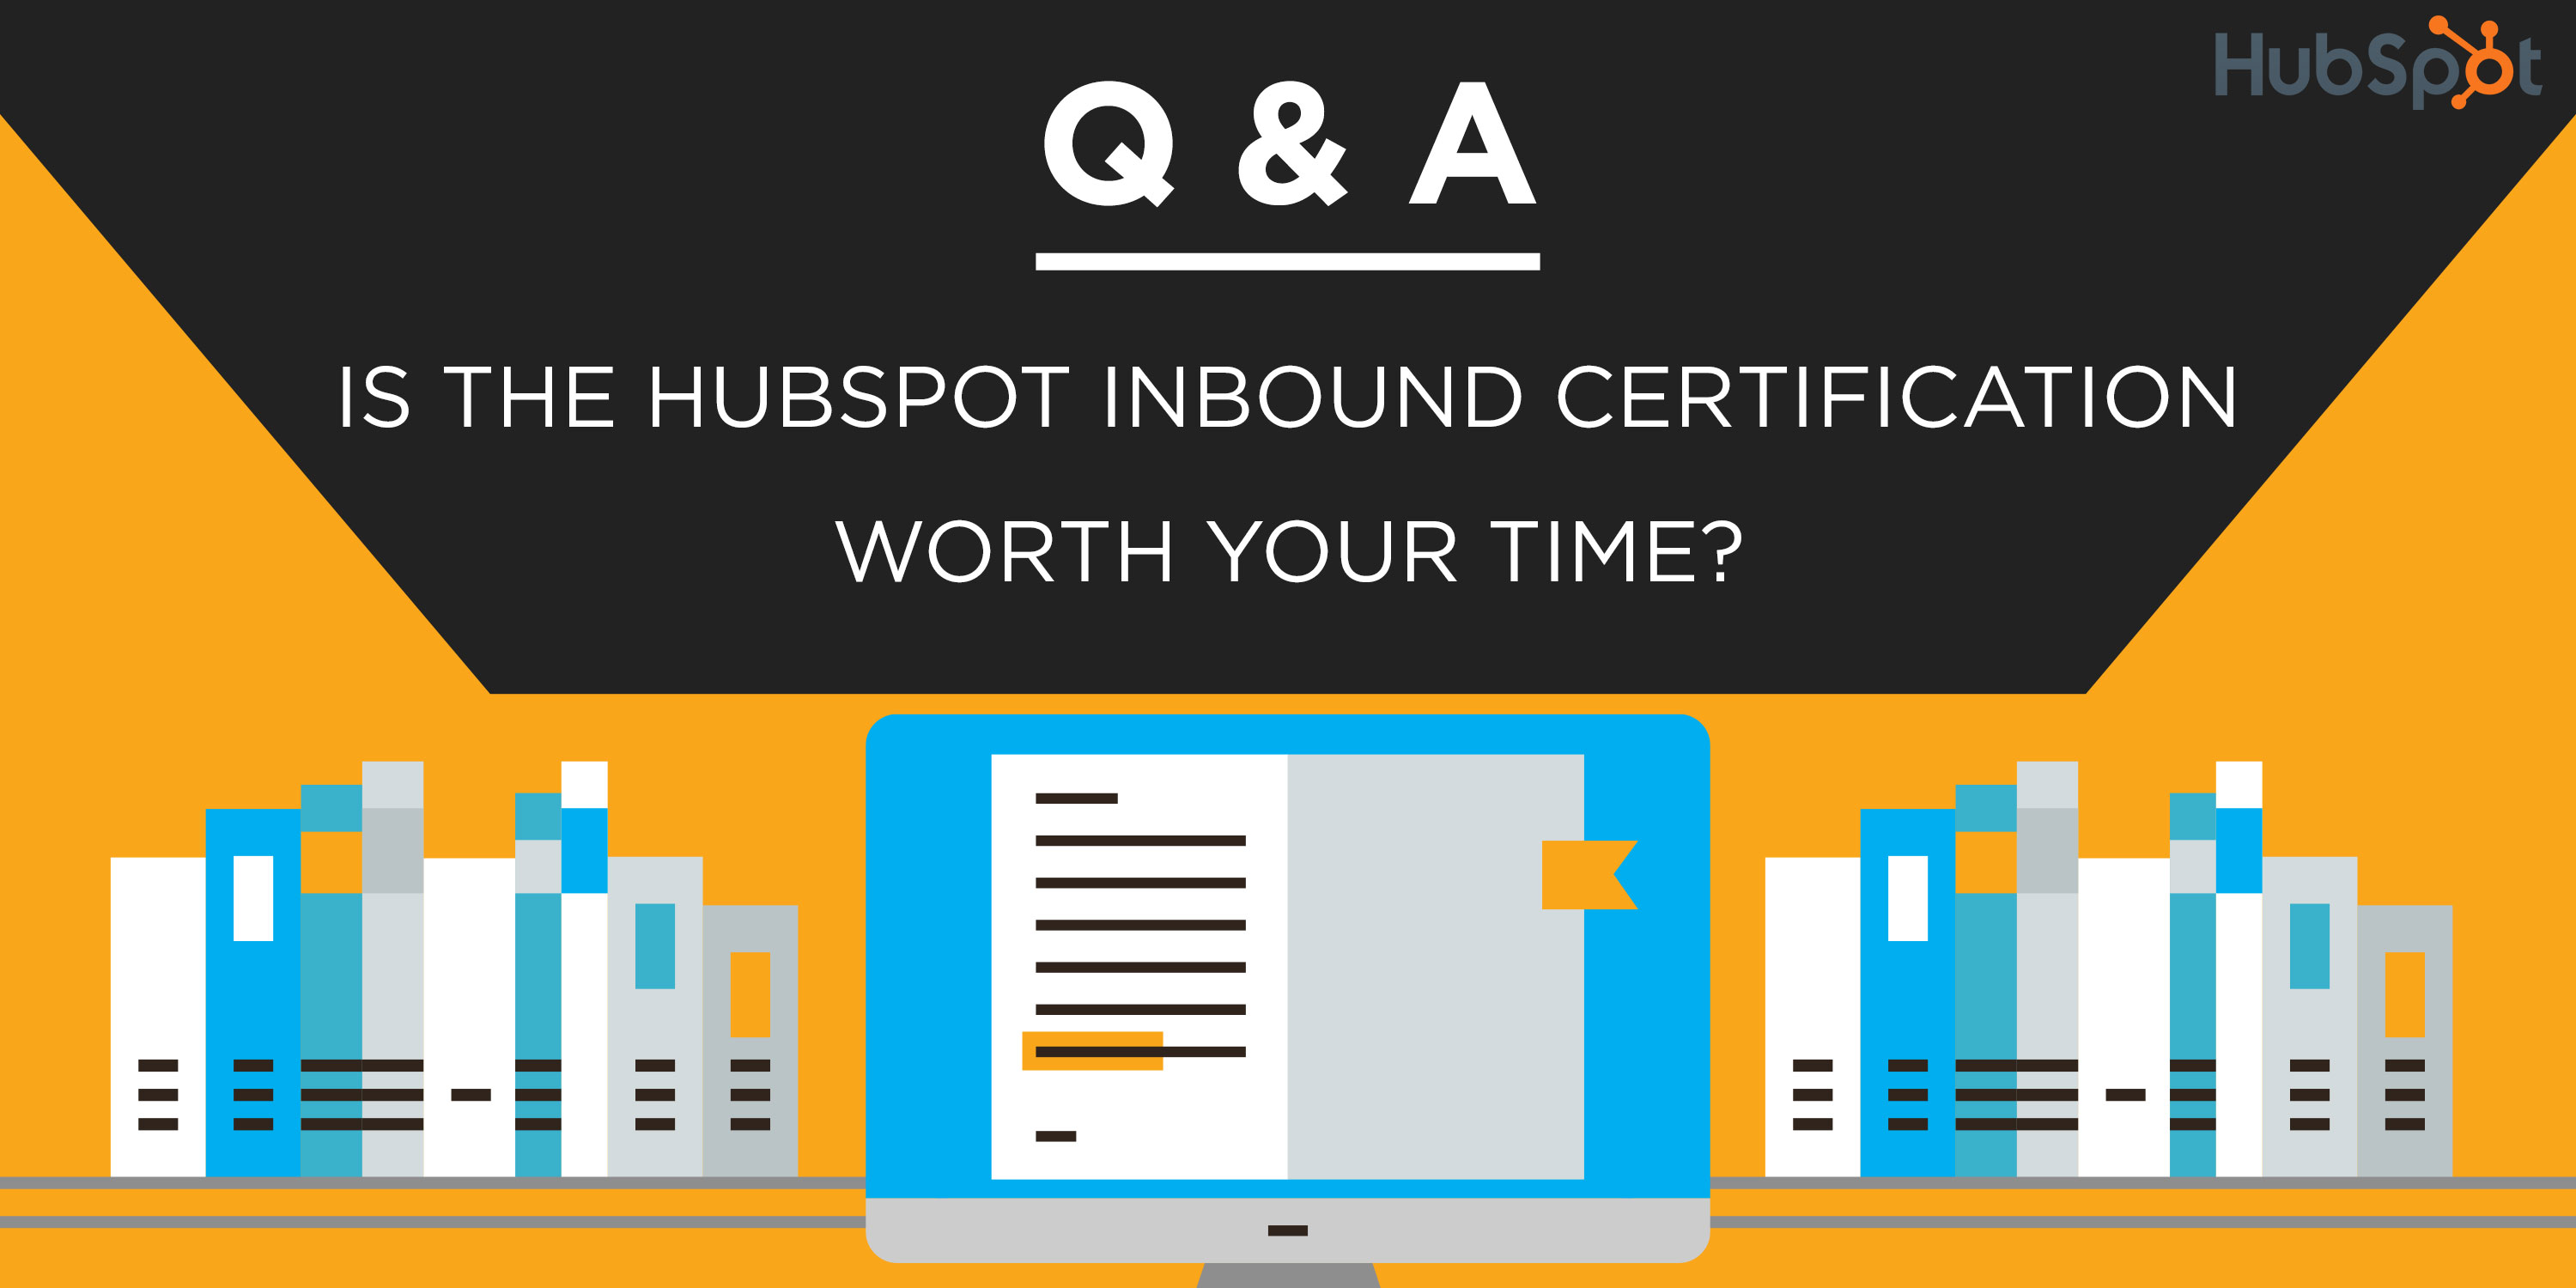 Q & A: Is the HubSpot Inbound Certification Worth Your Time?